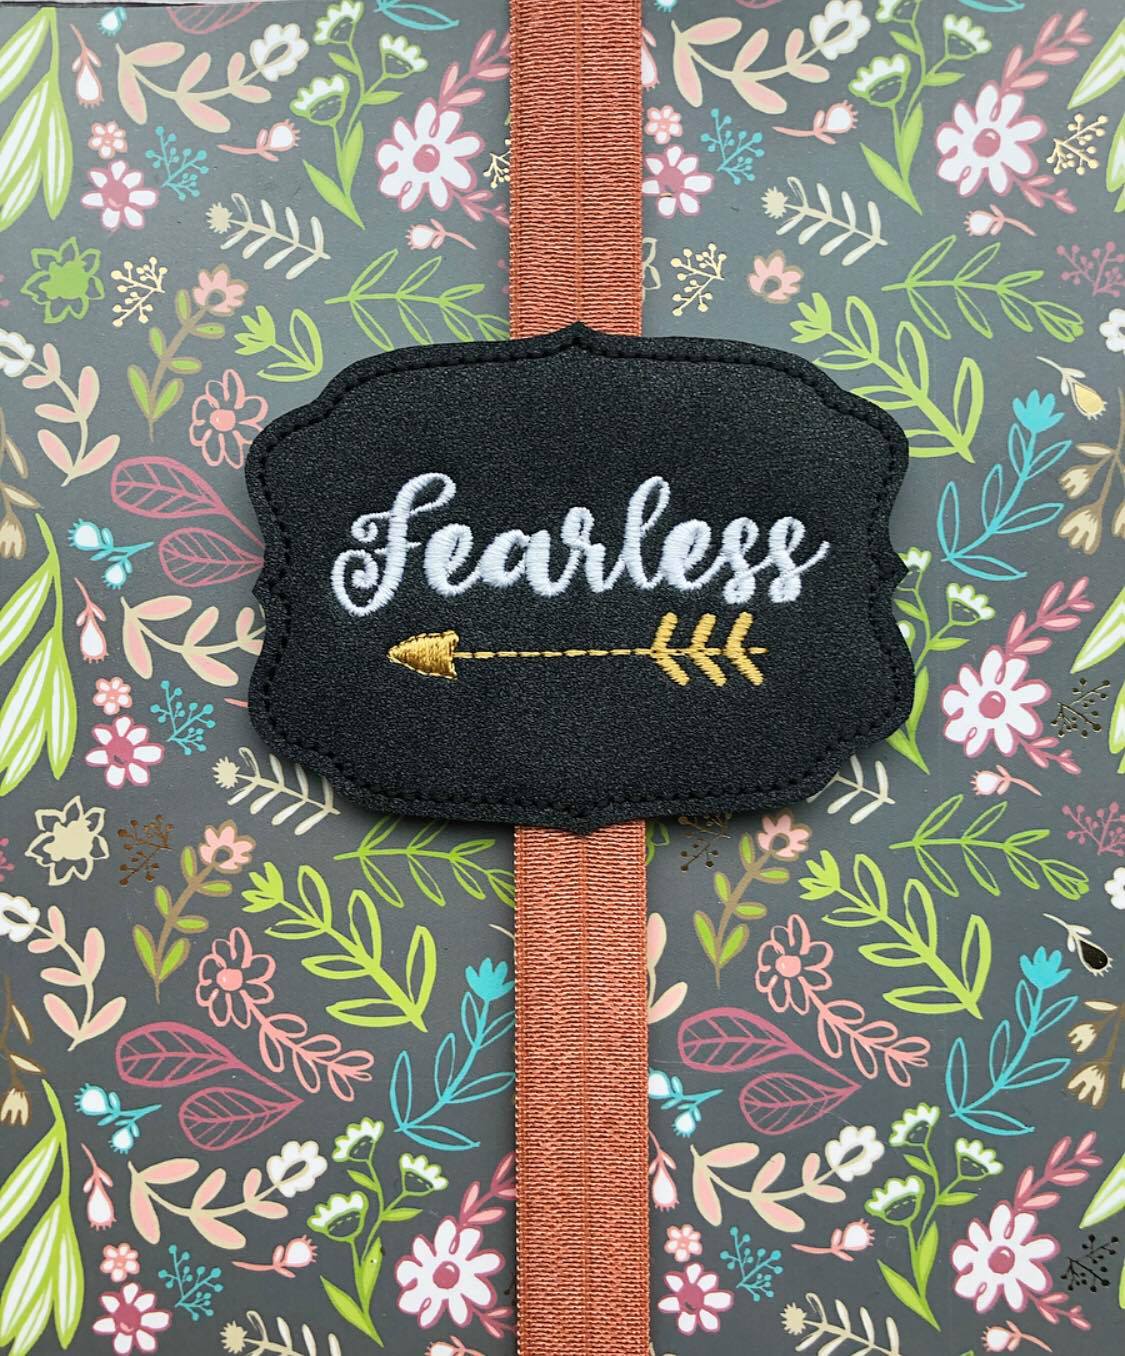 Fearless - Book Band - Digital Embroidery Design